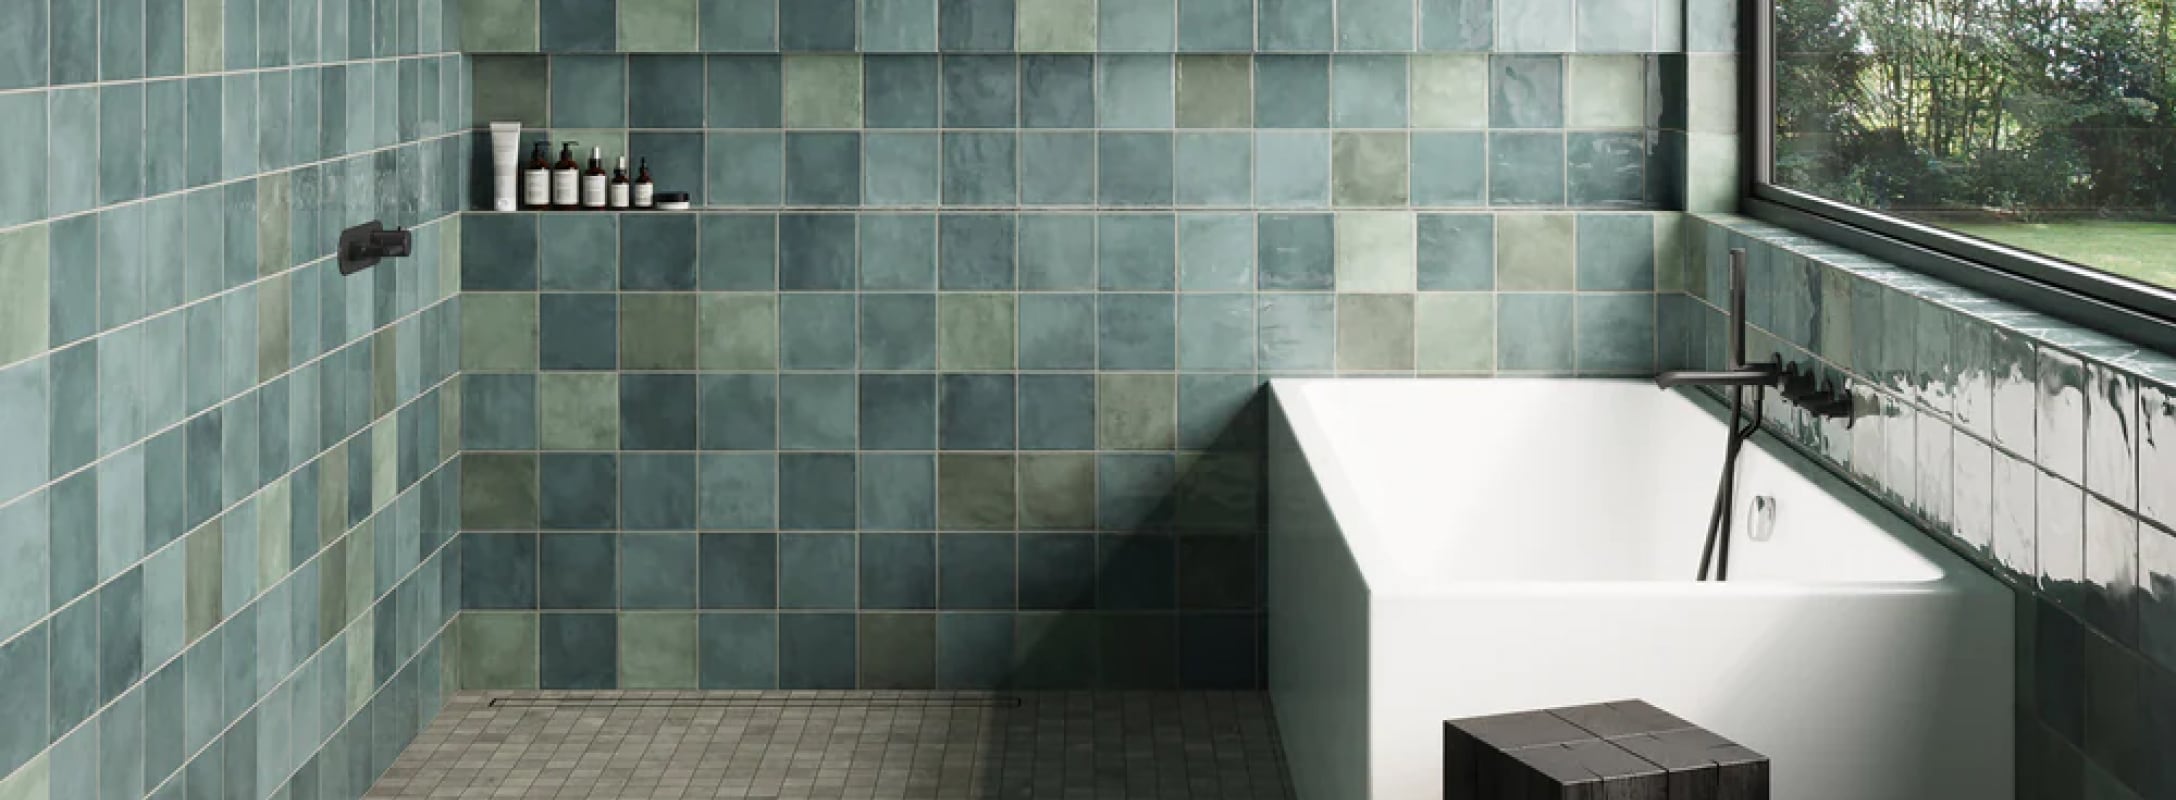 Ceramic Green Wall Tile in a modern bathroom, showcasing a spectrum of hues for a vibrant and sophisticated ambiance.